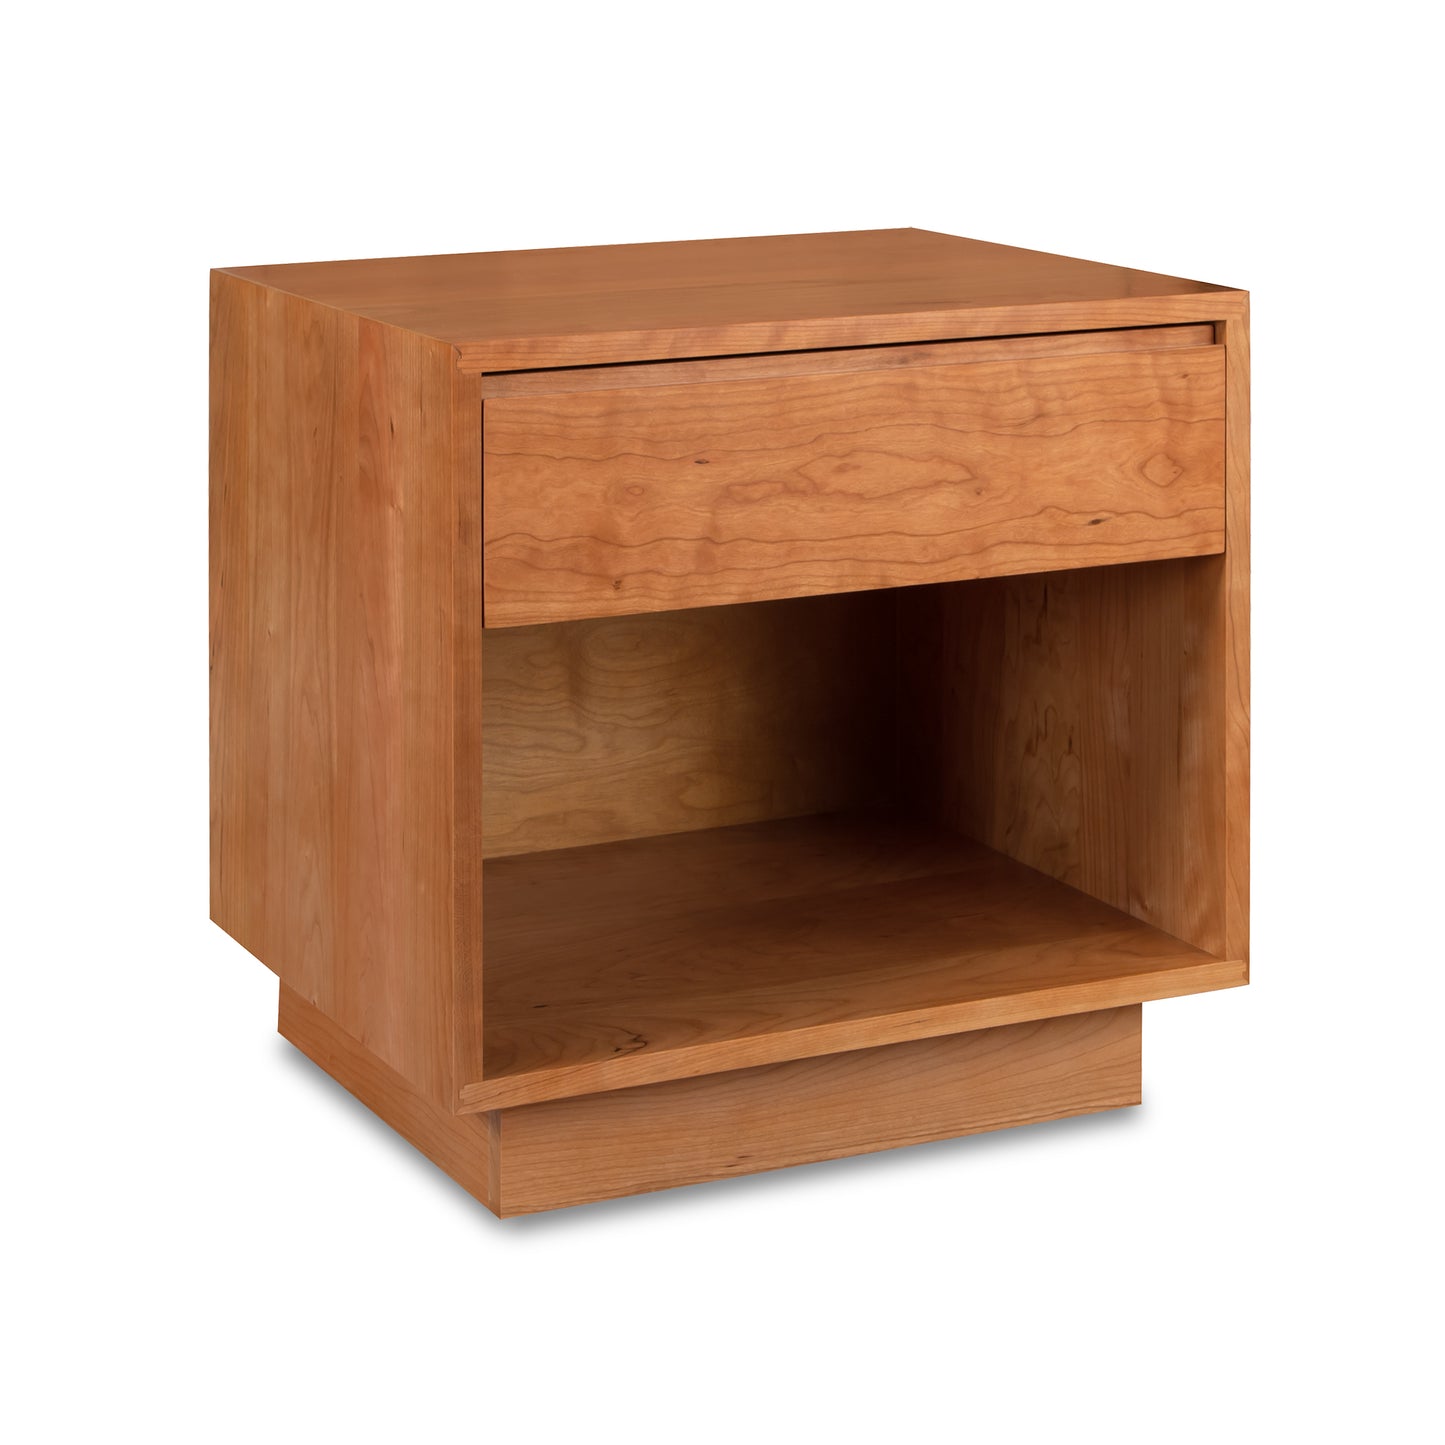 A wooden nightstand with a drawer on top.